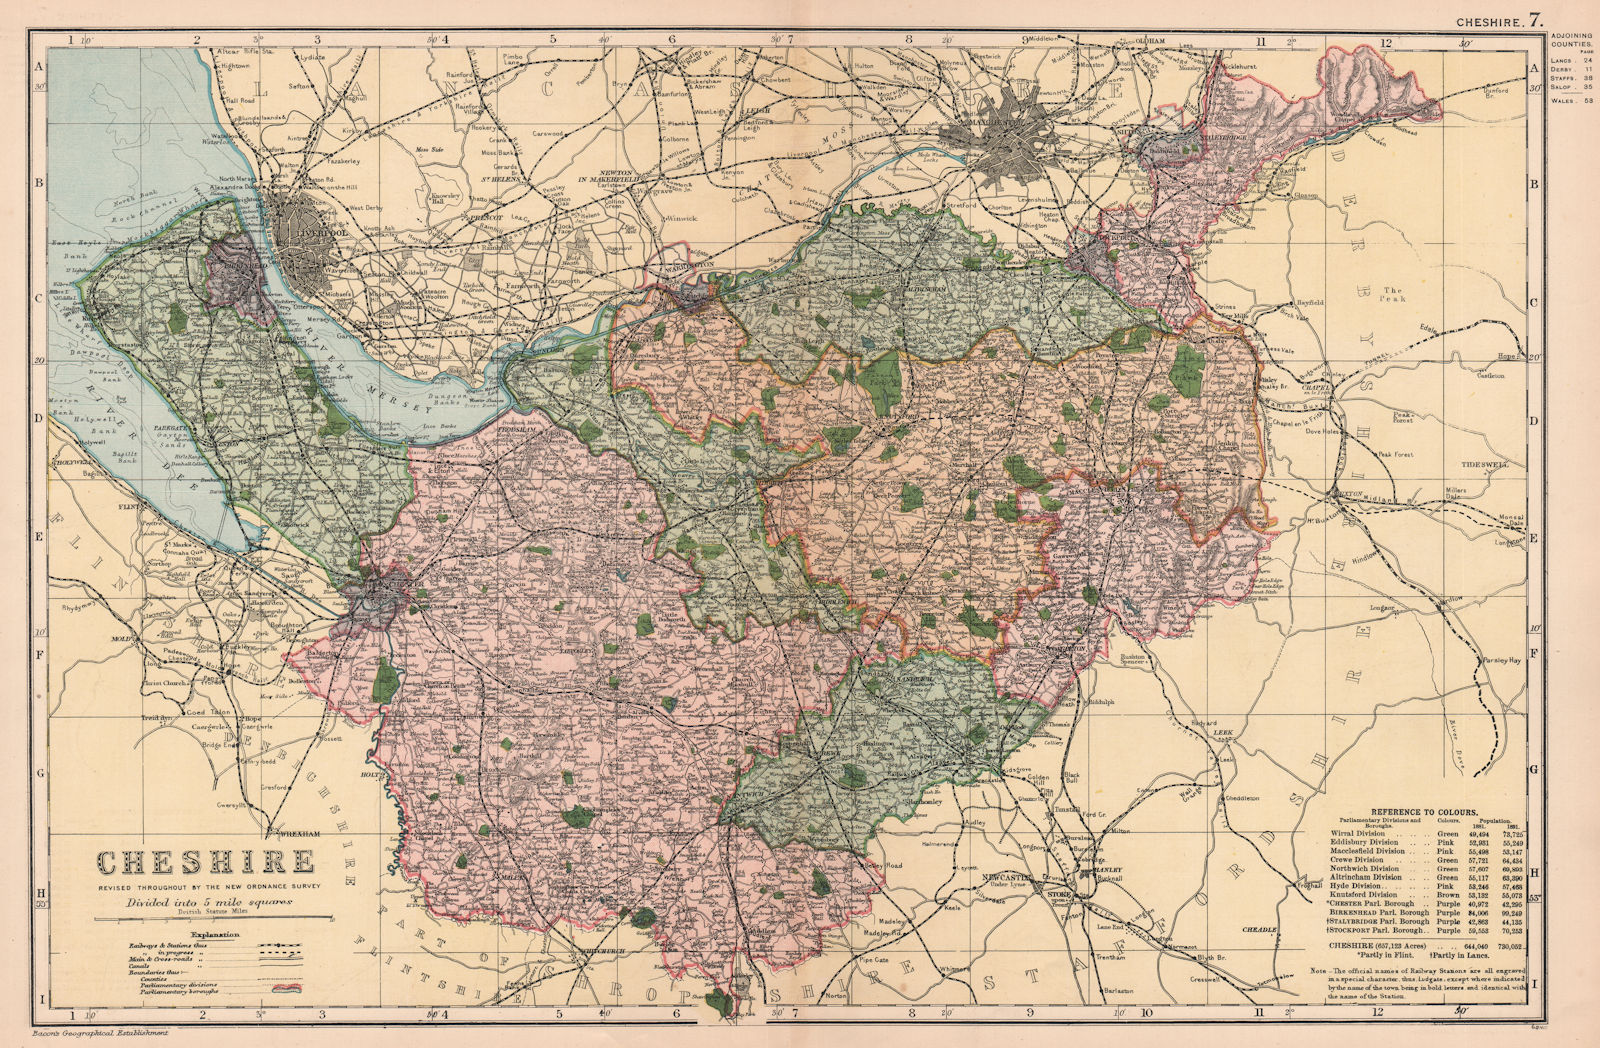 CHESHIRE. Showing Parliamentary divisions, boroughs & parks. BACON 1901 map